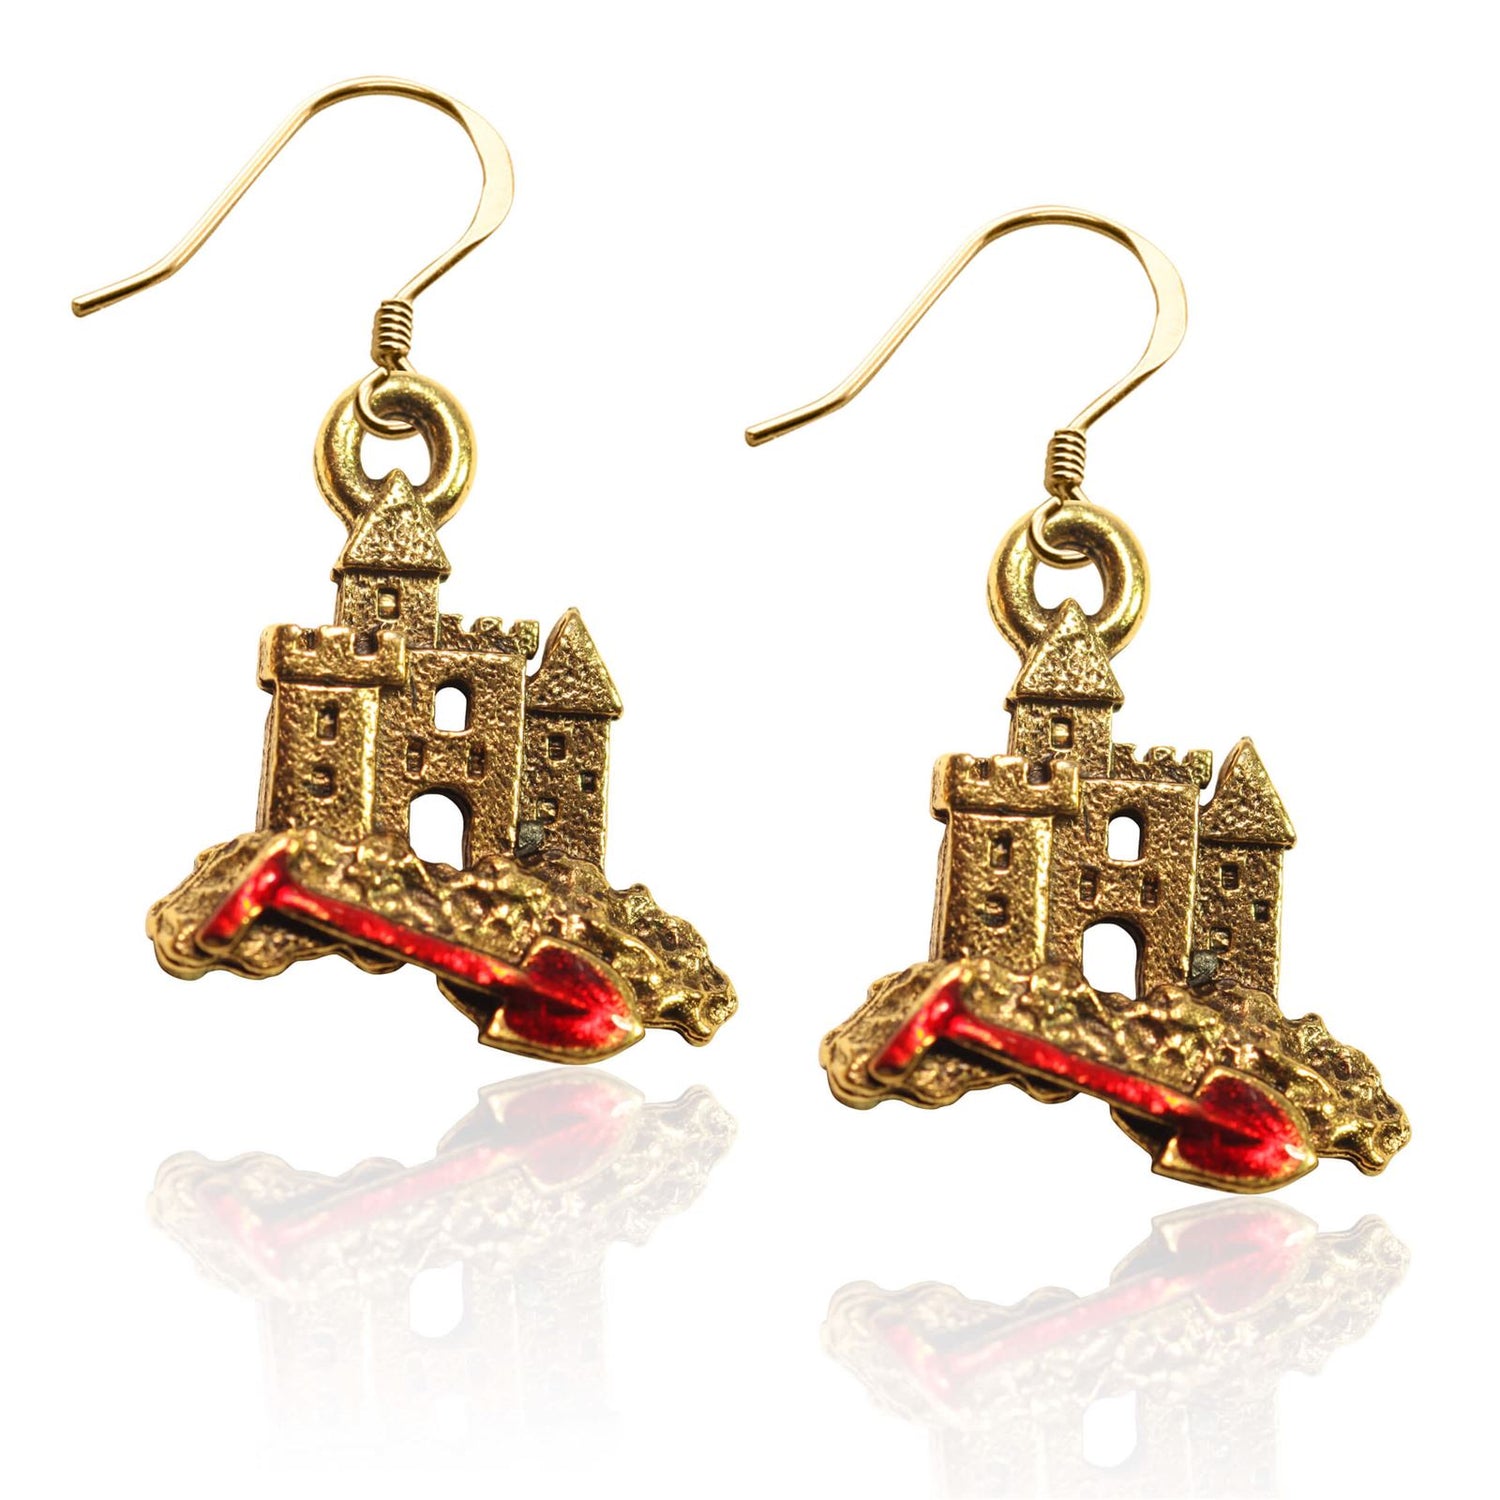 Whimsical Gifts | Sandcastle with Shovel Charm Earrings  in Gold Finish | Holiday & Seasonal Themed | Spring & Summer Fun | Jewelry